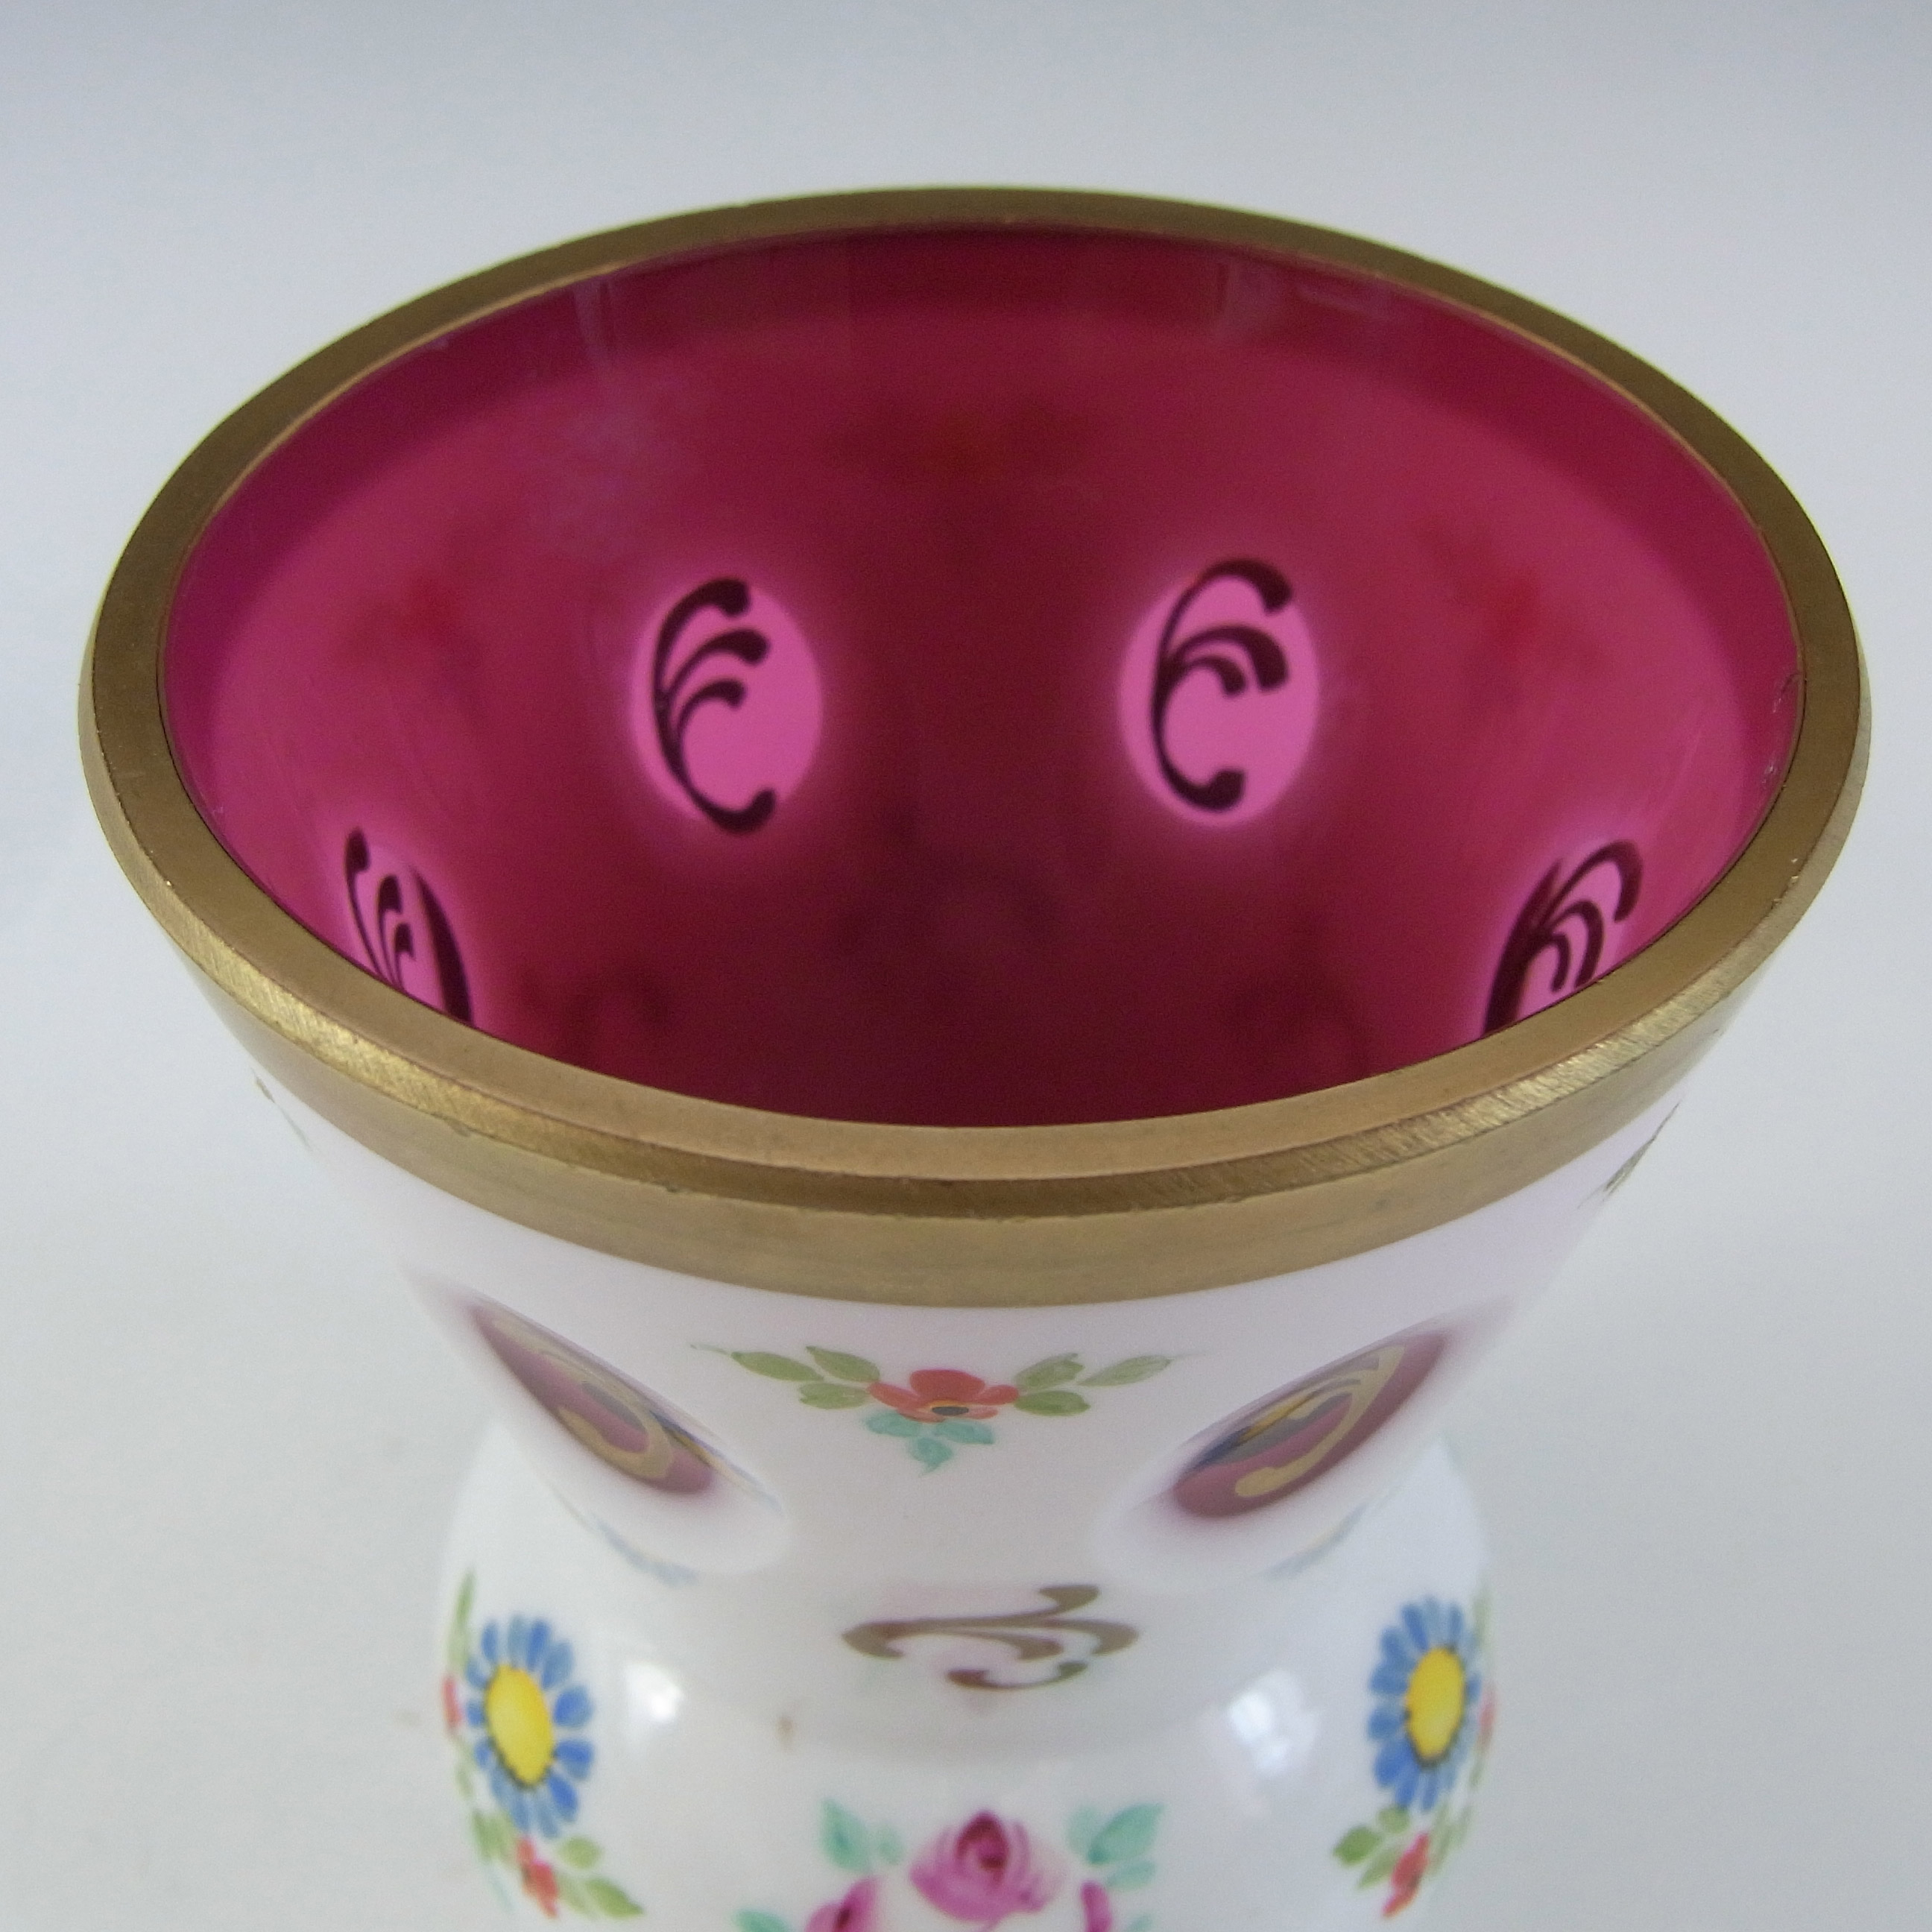 Crystalex Czech Enamelled Pink & White Overlay / Cut Glass Vase - Click Image to Close